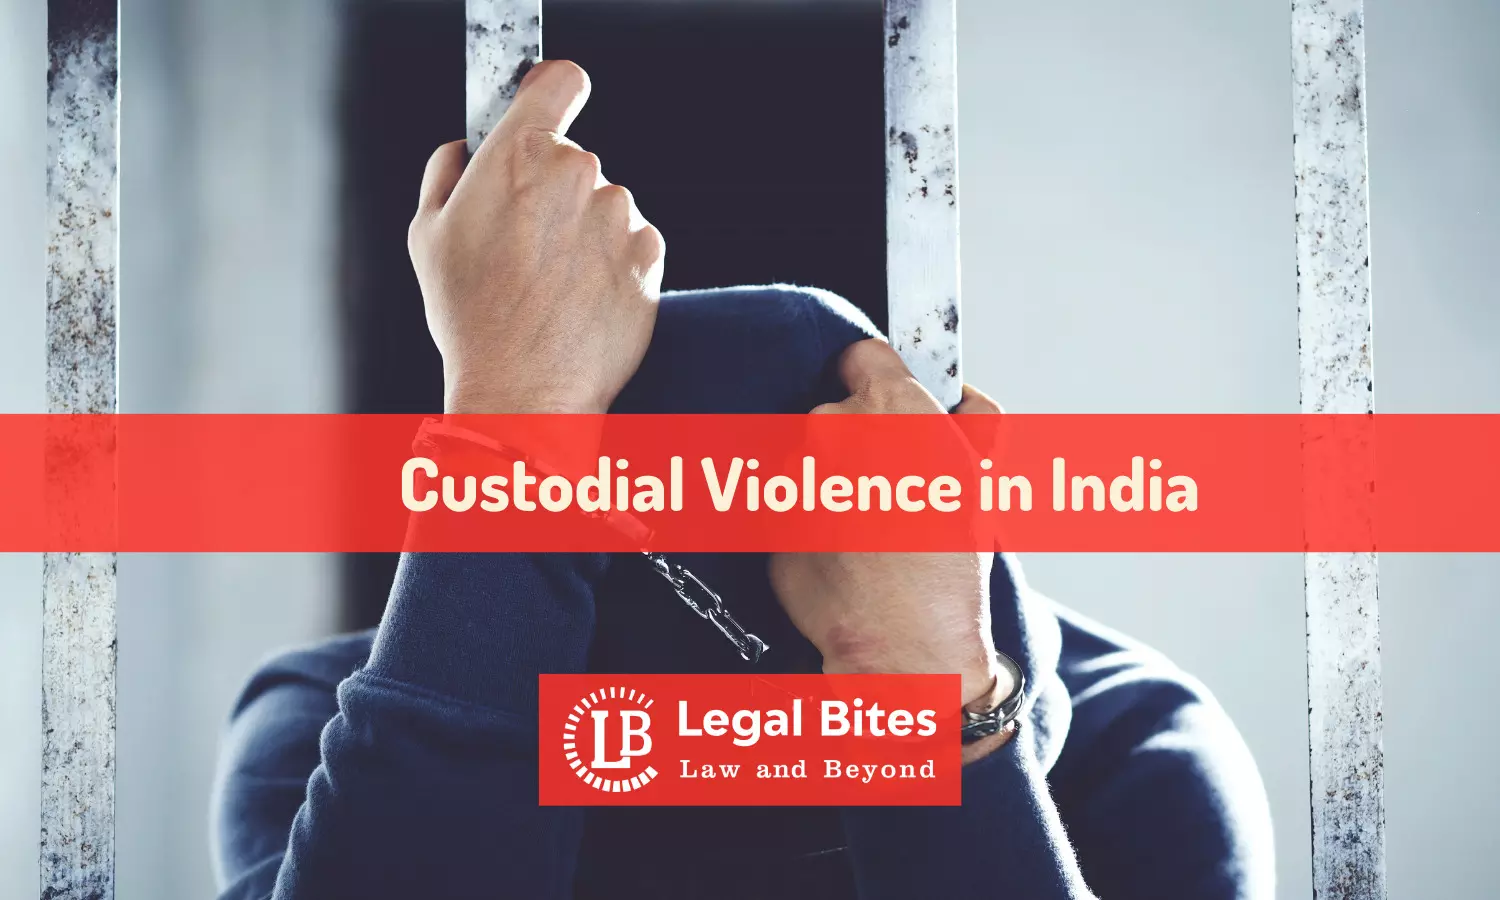 The Status of Custodial Violence in India